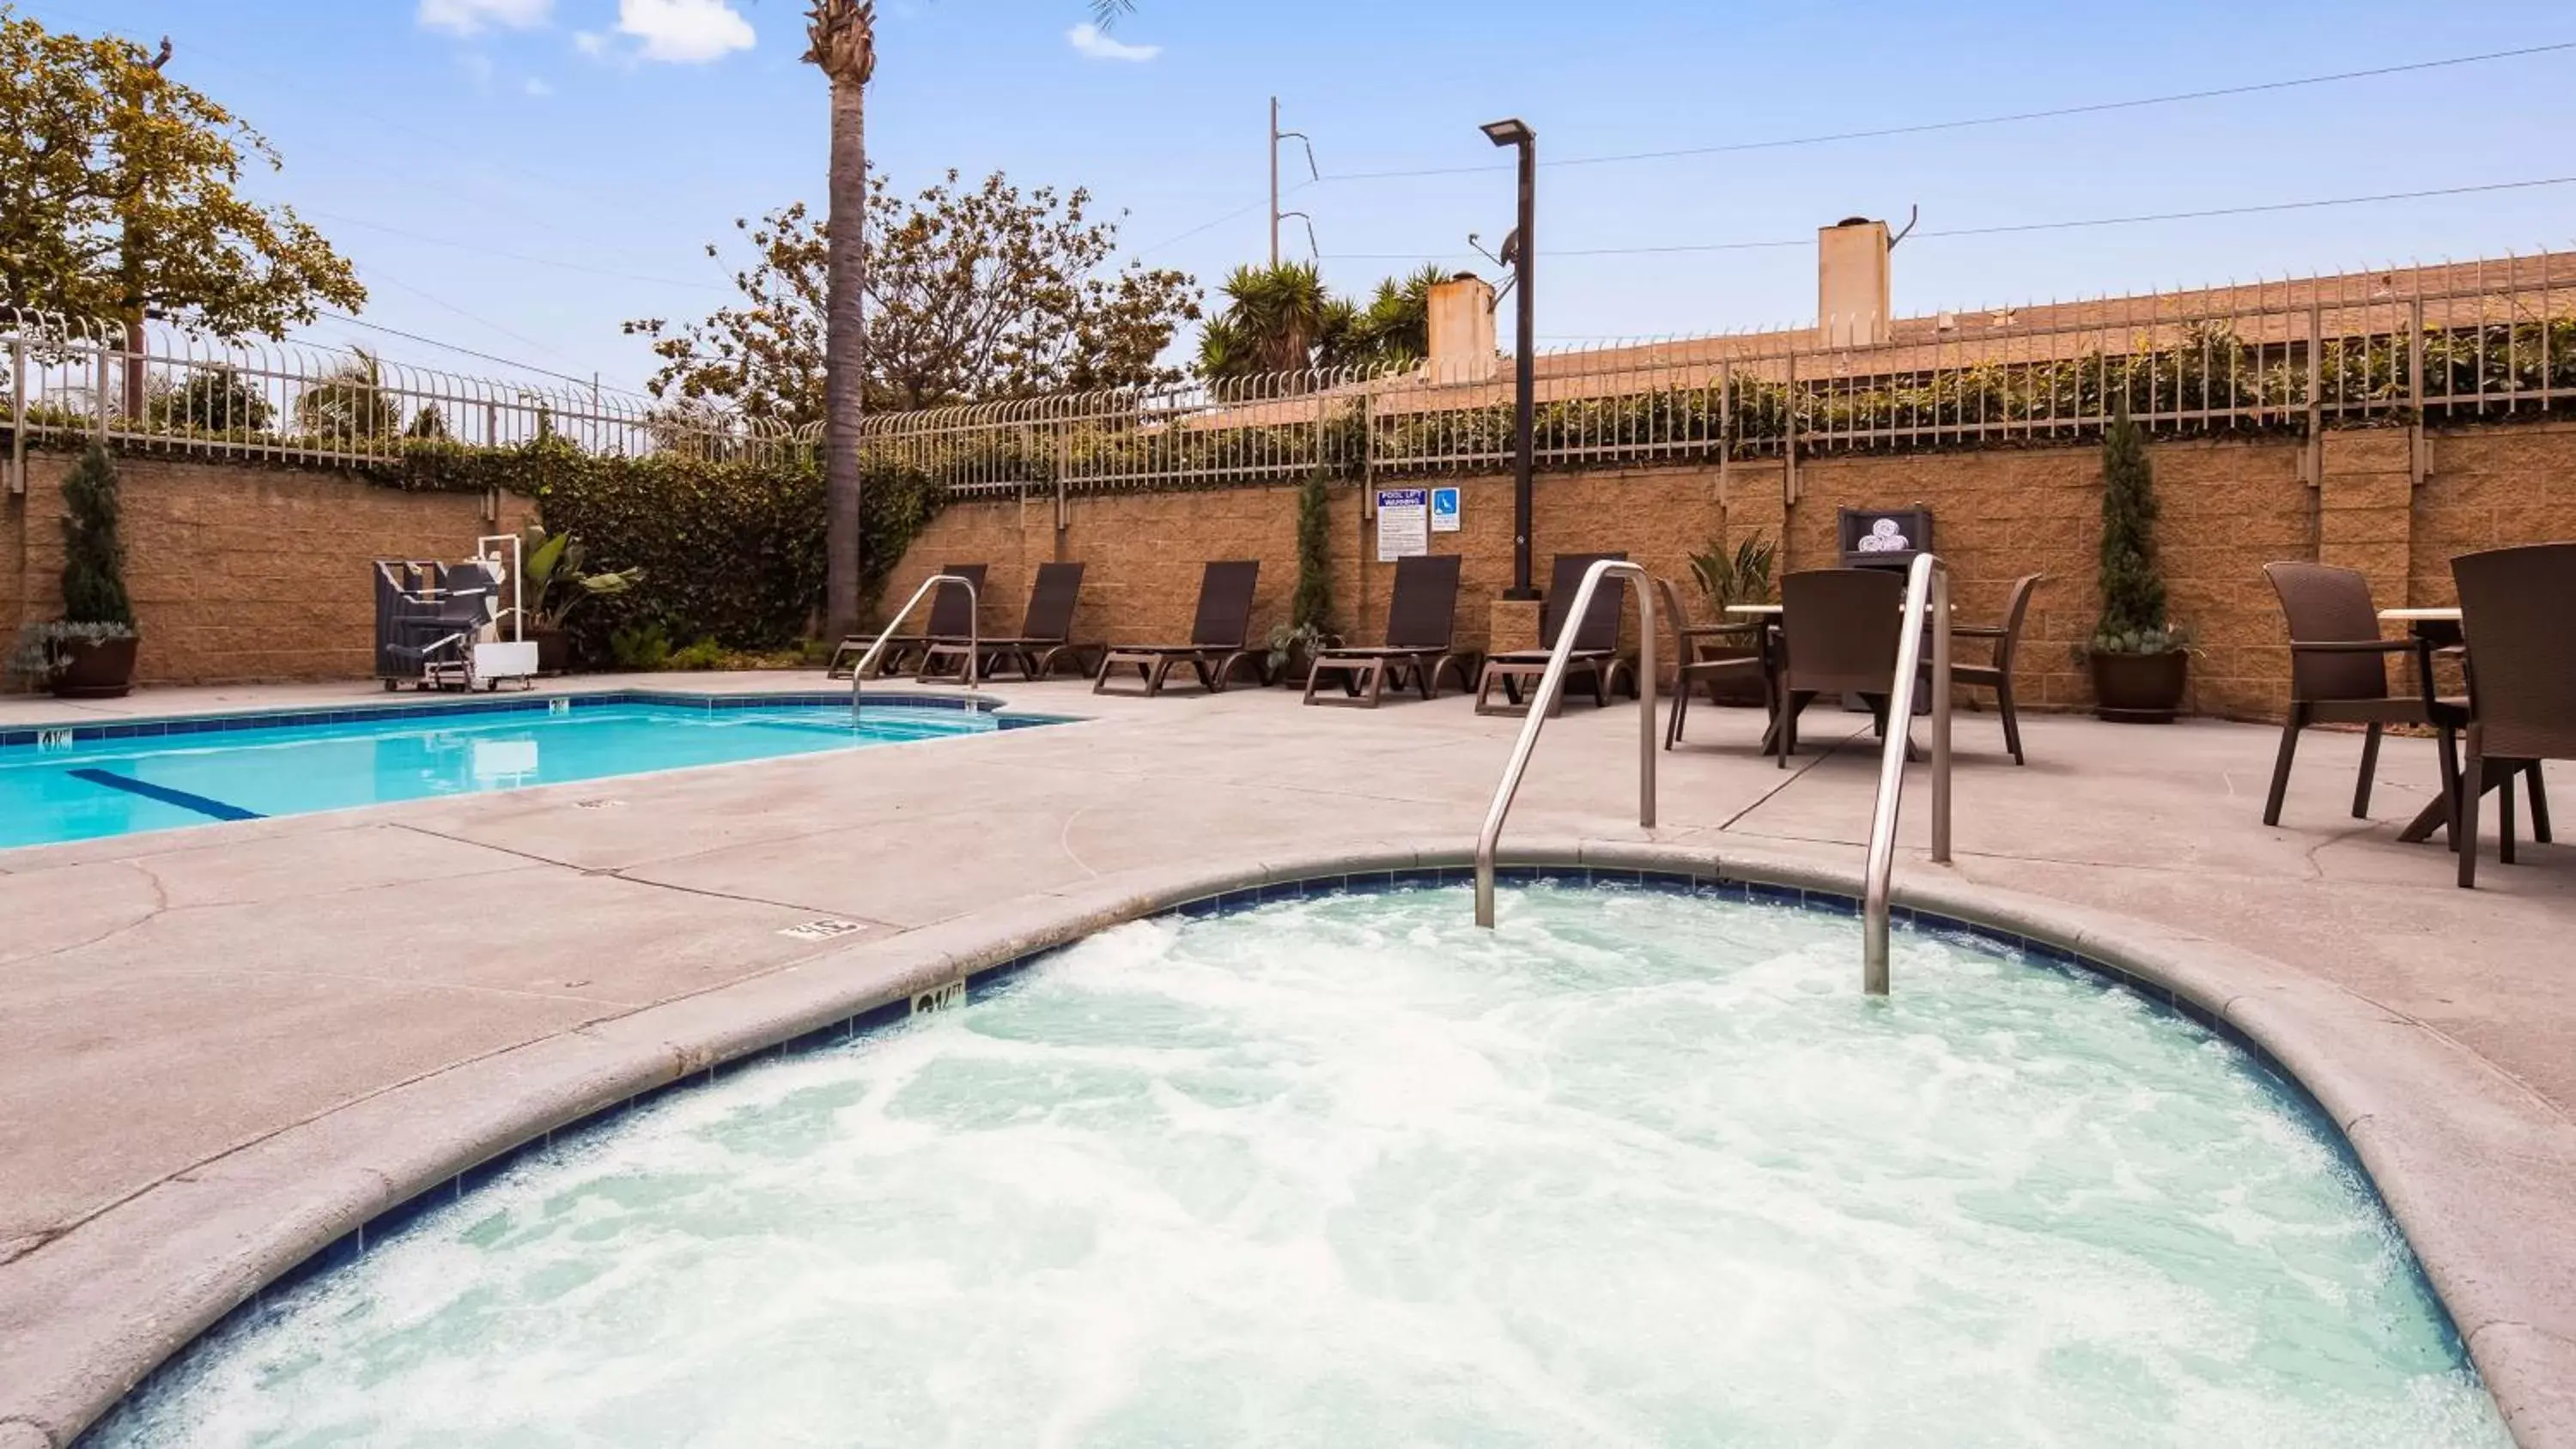 On site, Swimming Pool in Best Western Airpark Hotel - Los Angeles LAX Airport